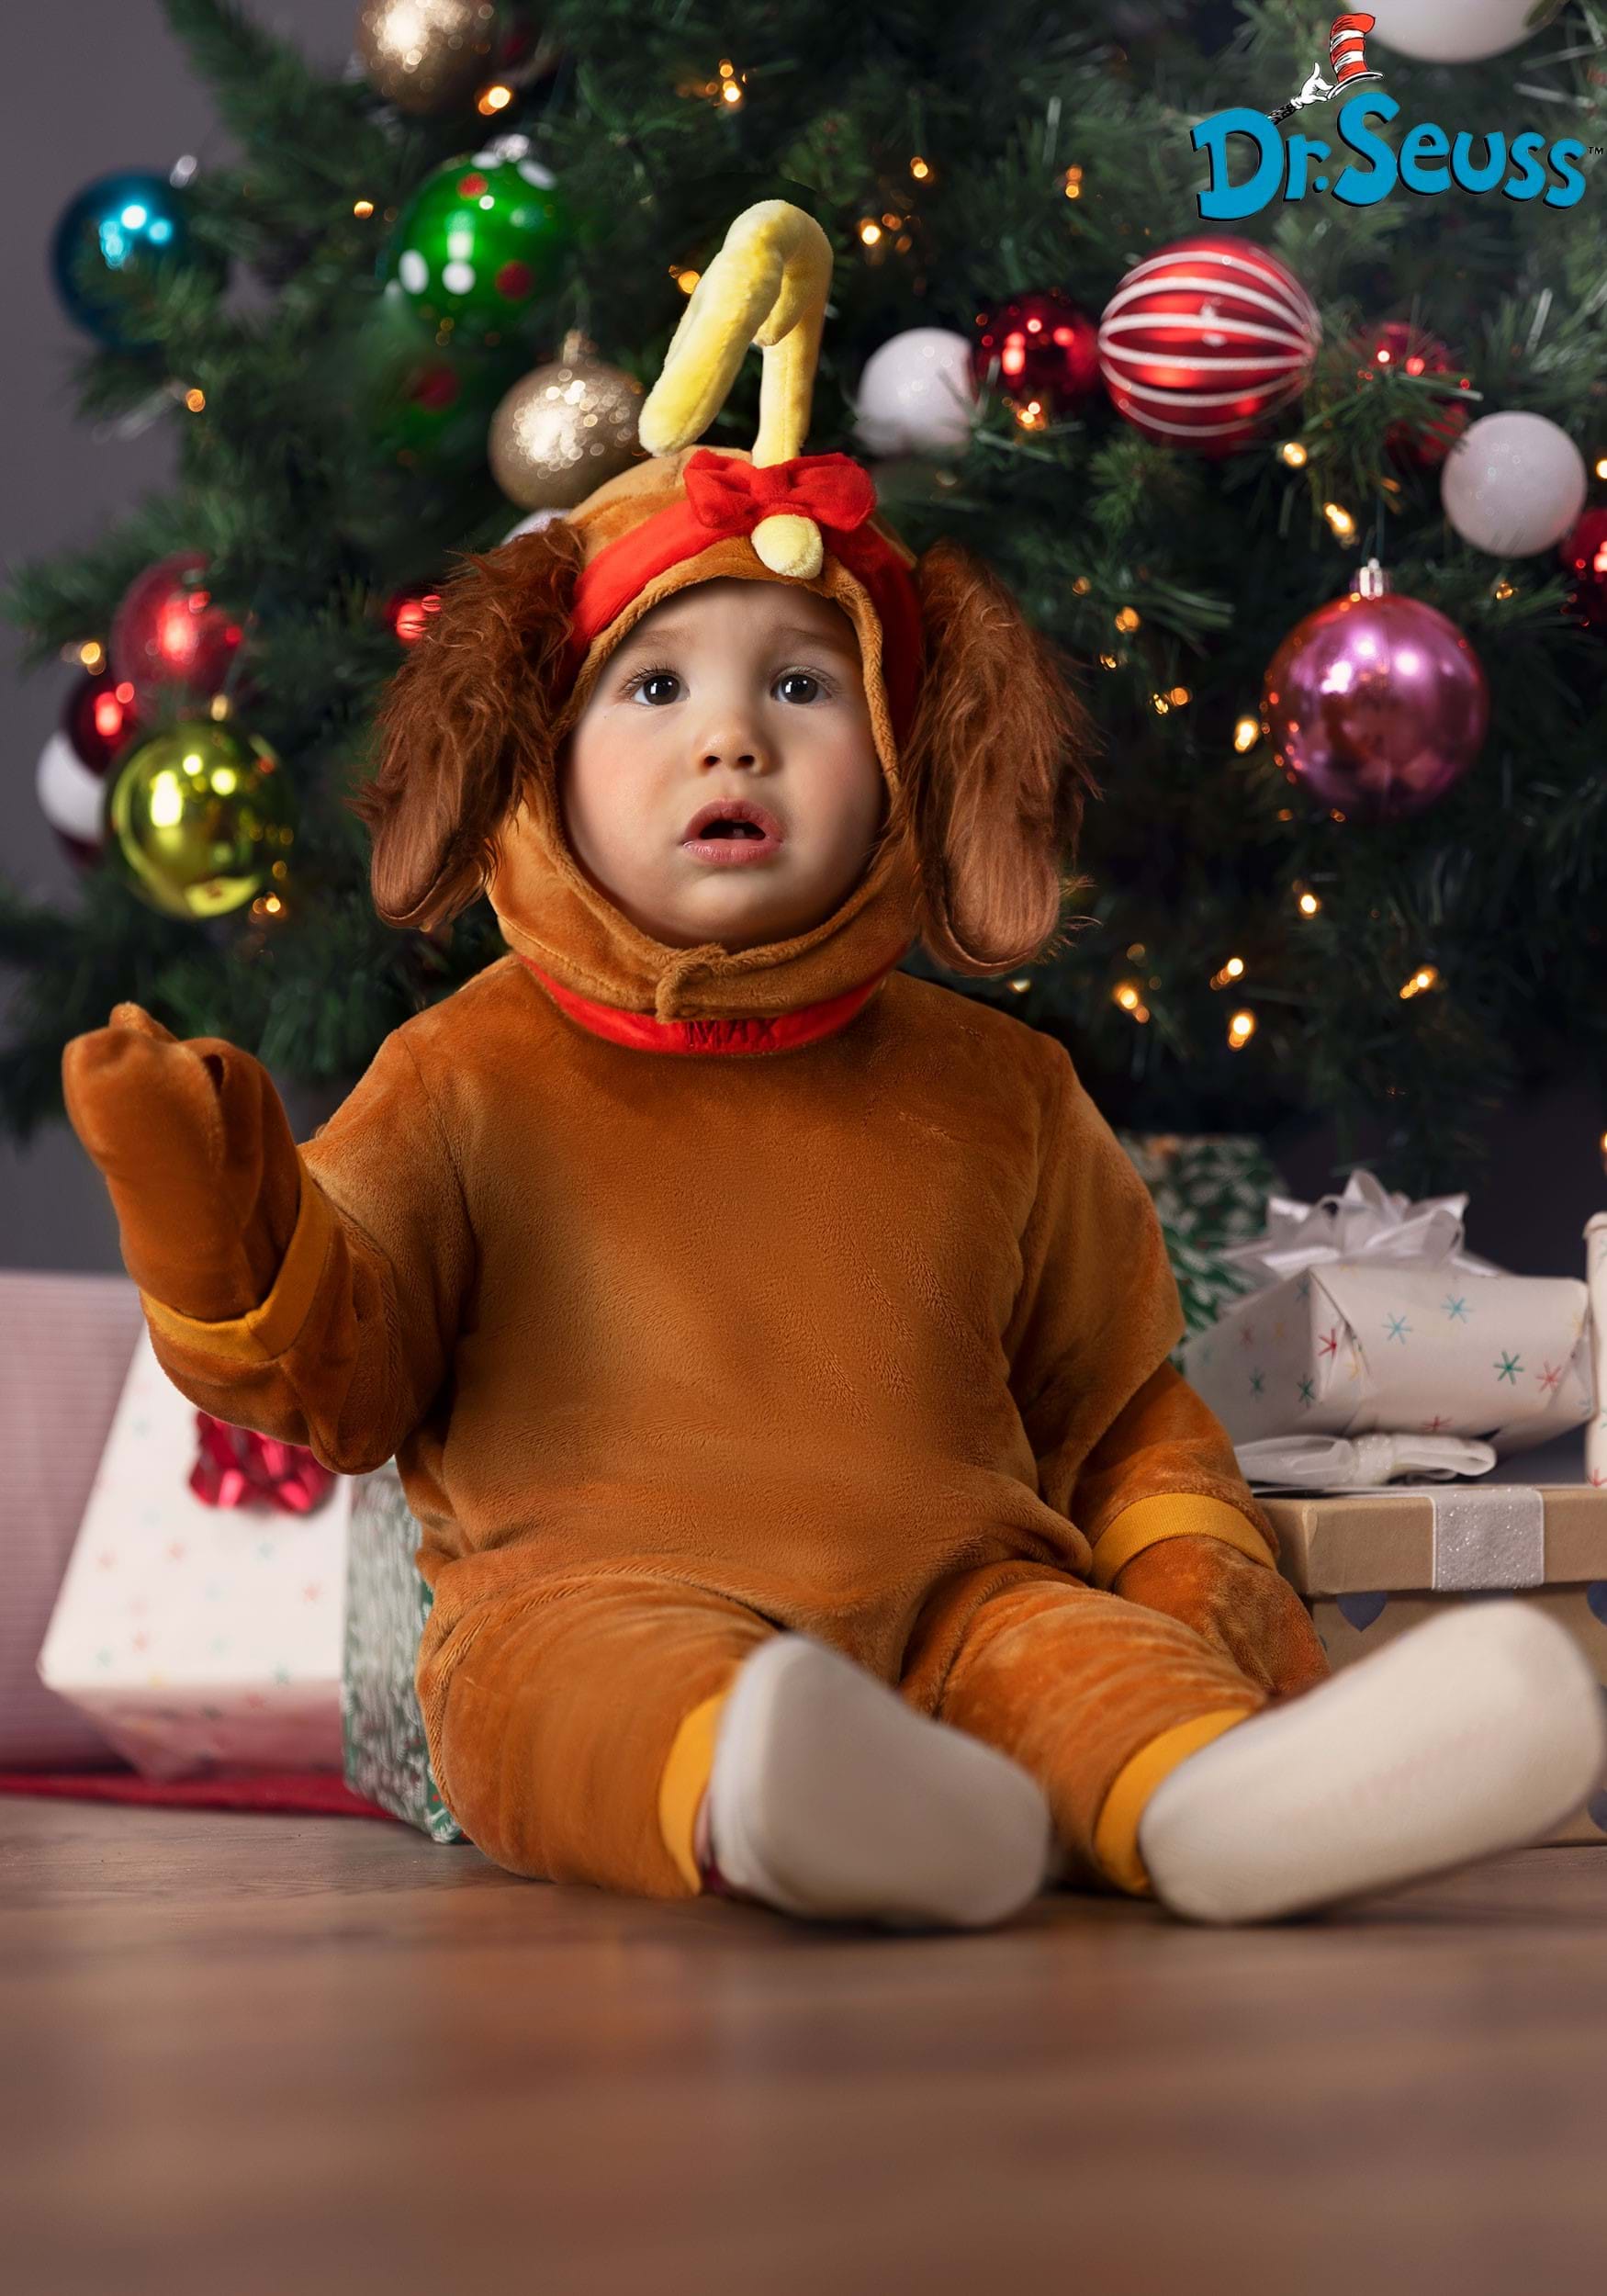 https://images.halloweencostumes.com/products/85538/1-1/infant-the-grinch-max-costume.jpg